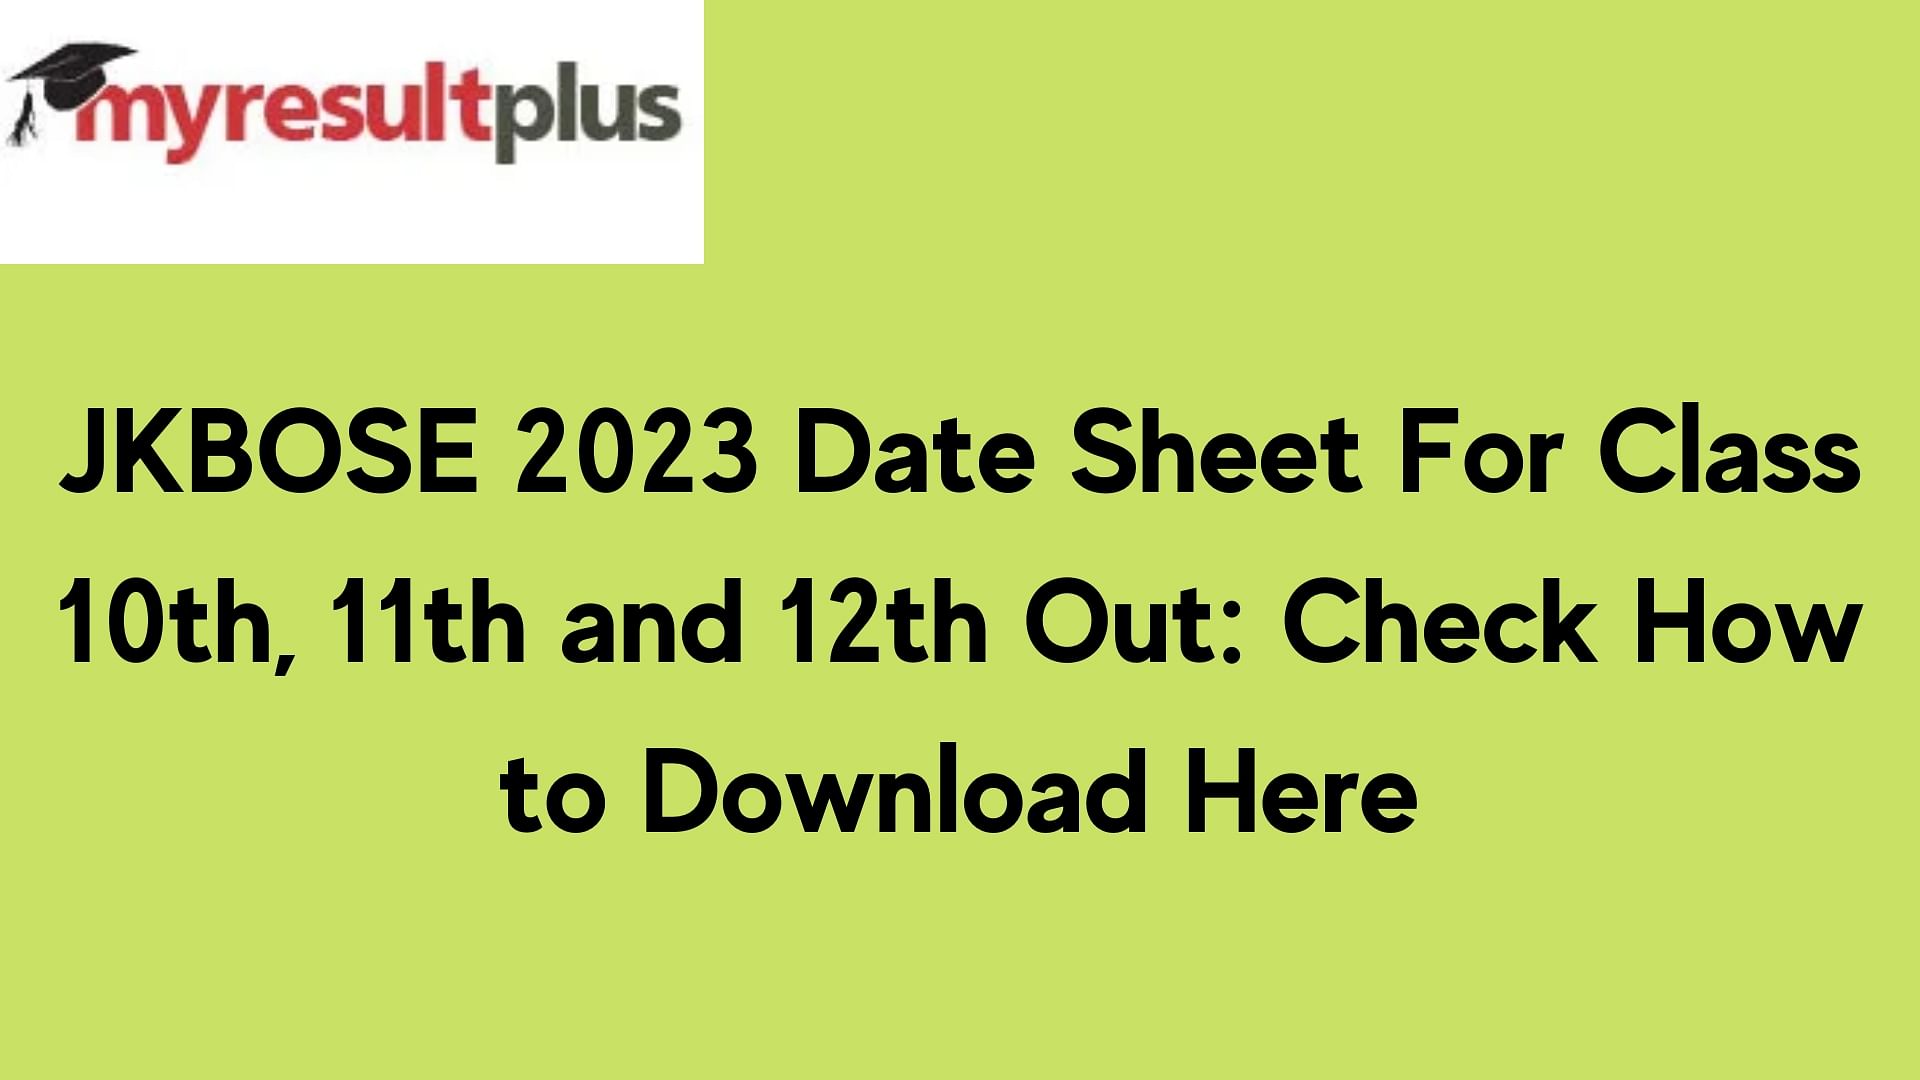 JKBOSE 2023 Date Sheet For Class 10, 11 and 12 Out: Check How to Download Here